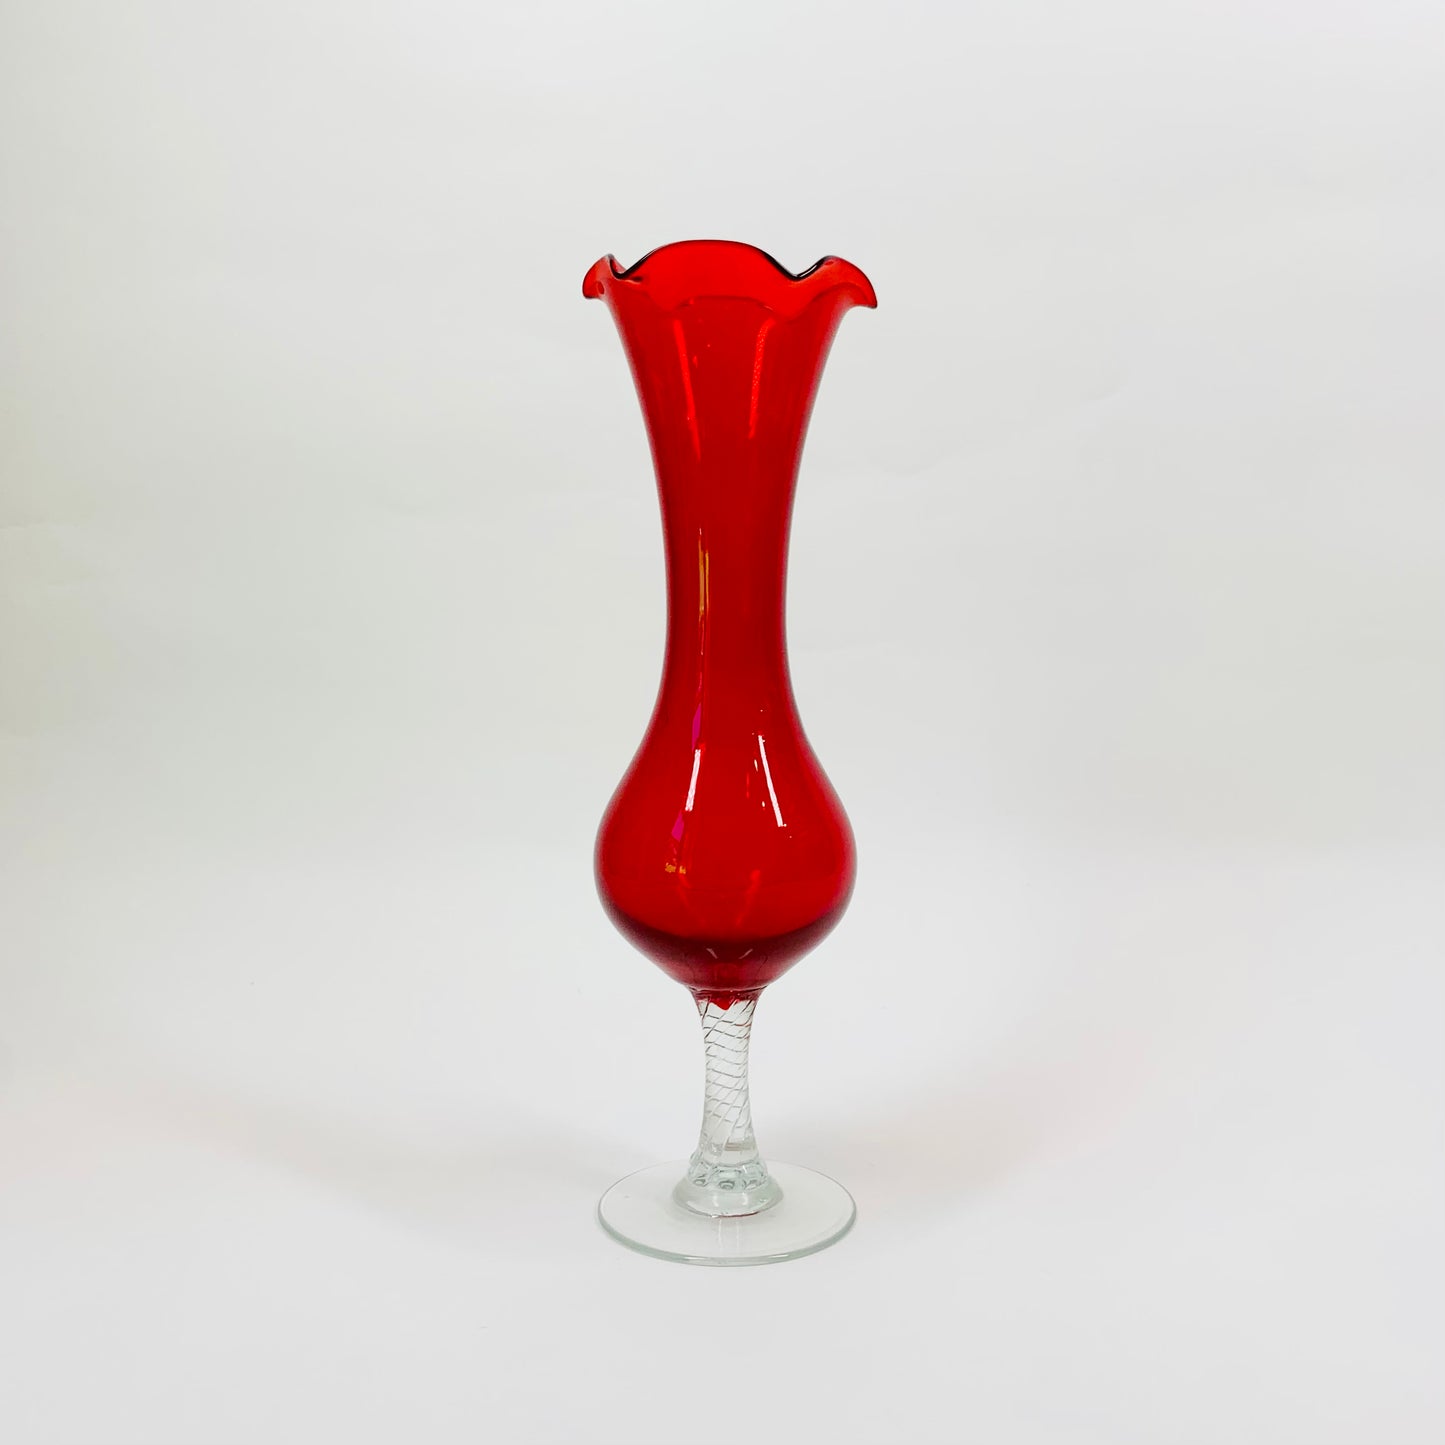 Midcentury Italian red glass footed bud vase with ruffle rim